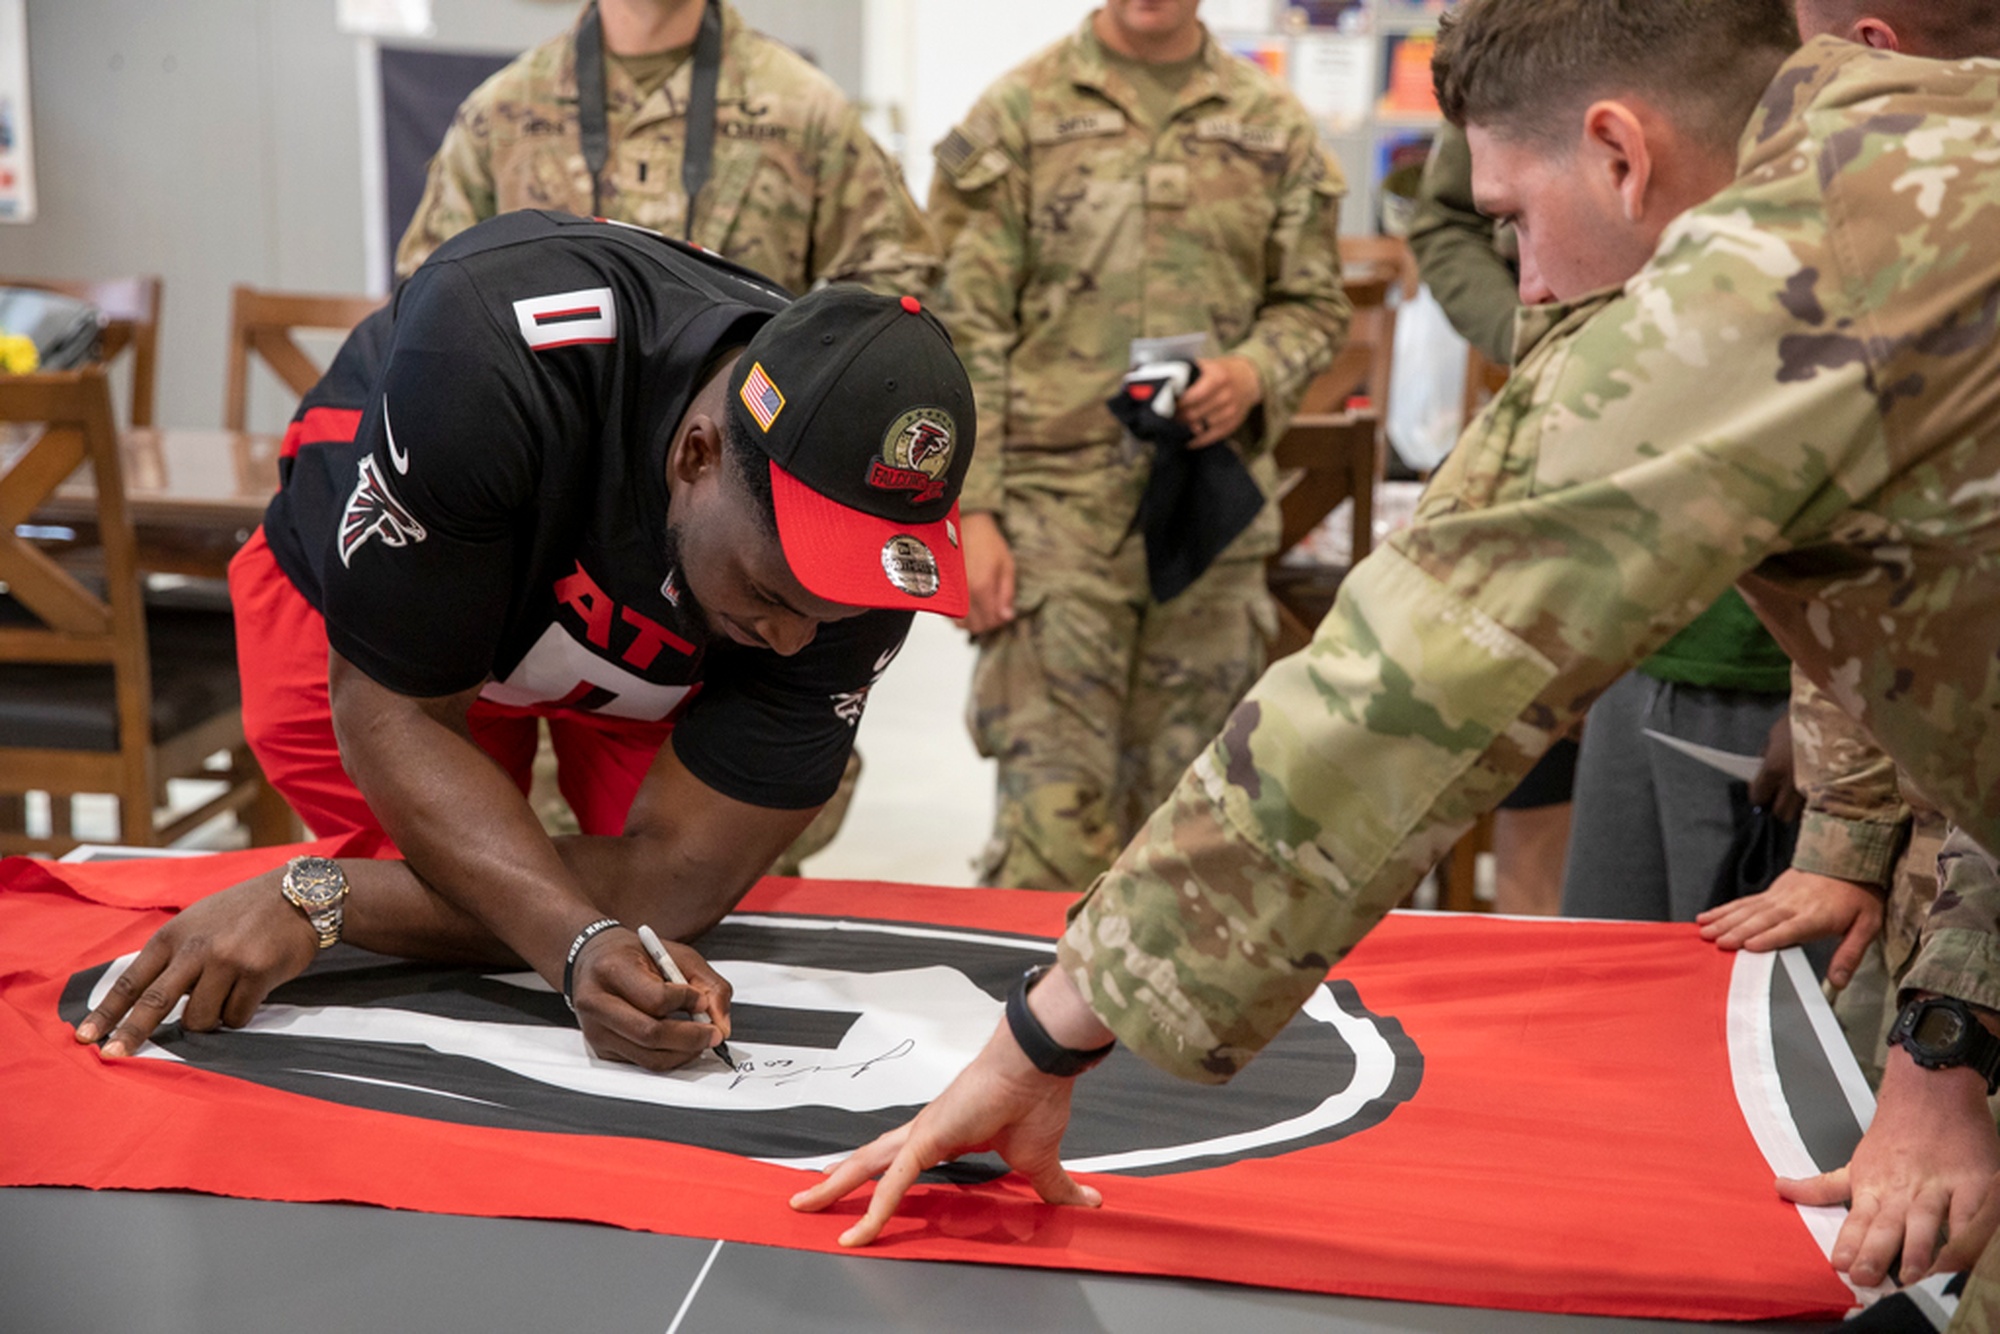 DVIDS - Images - Players from the Atlanta Falcons visit Soldiers in Romania  [Image 1 of 6]